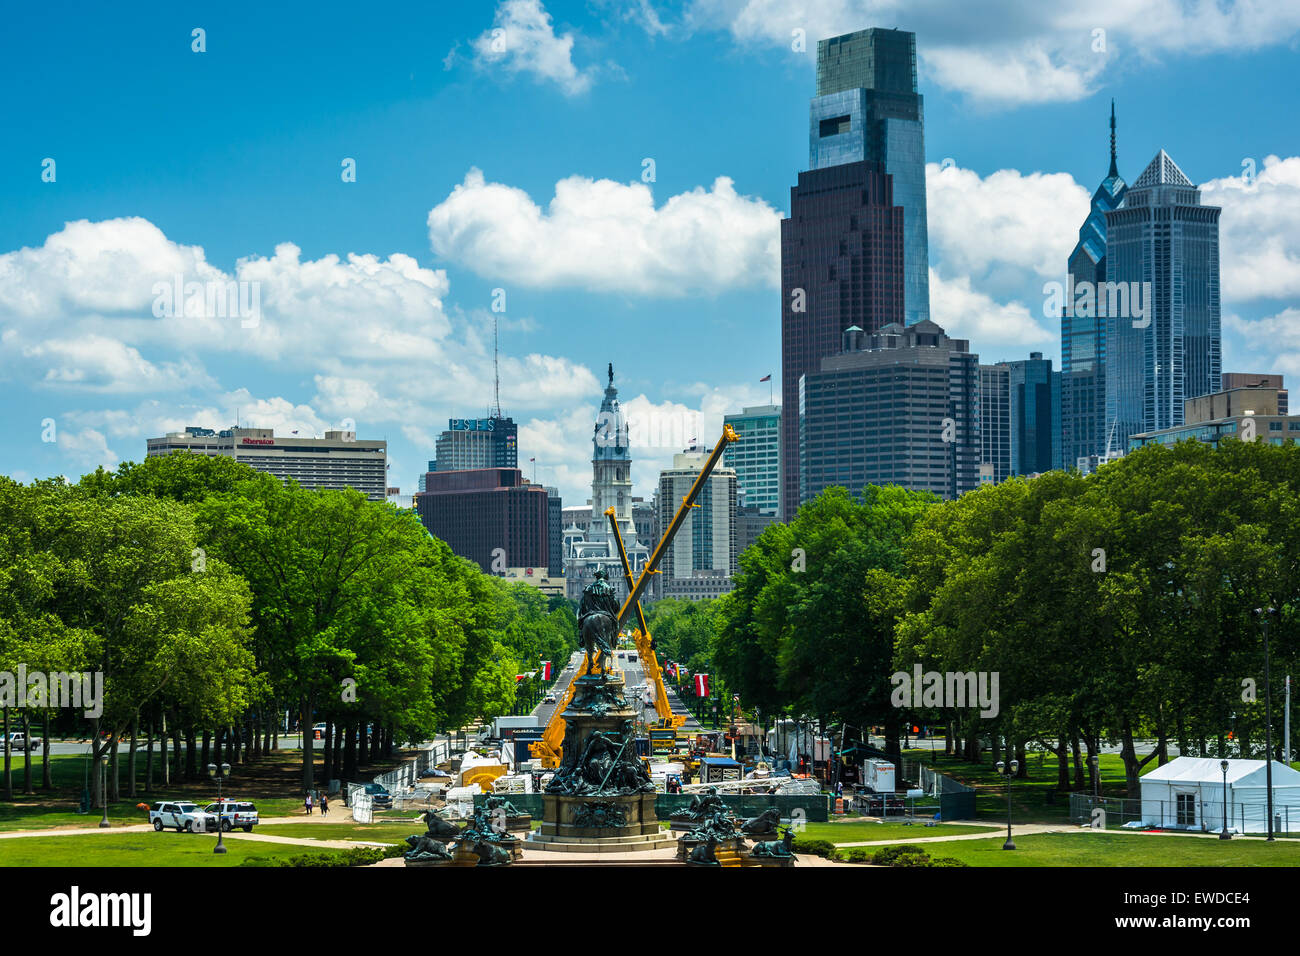 View of Eakins Oval and Center City, in Philadelphia, Pennsylvania. Stock Photo